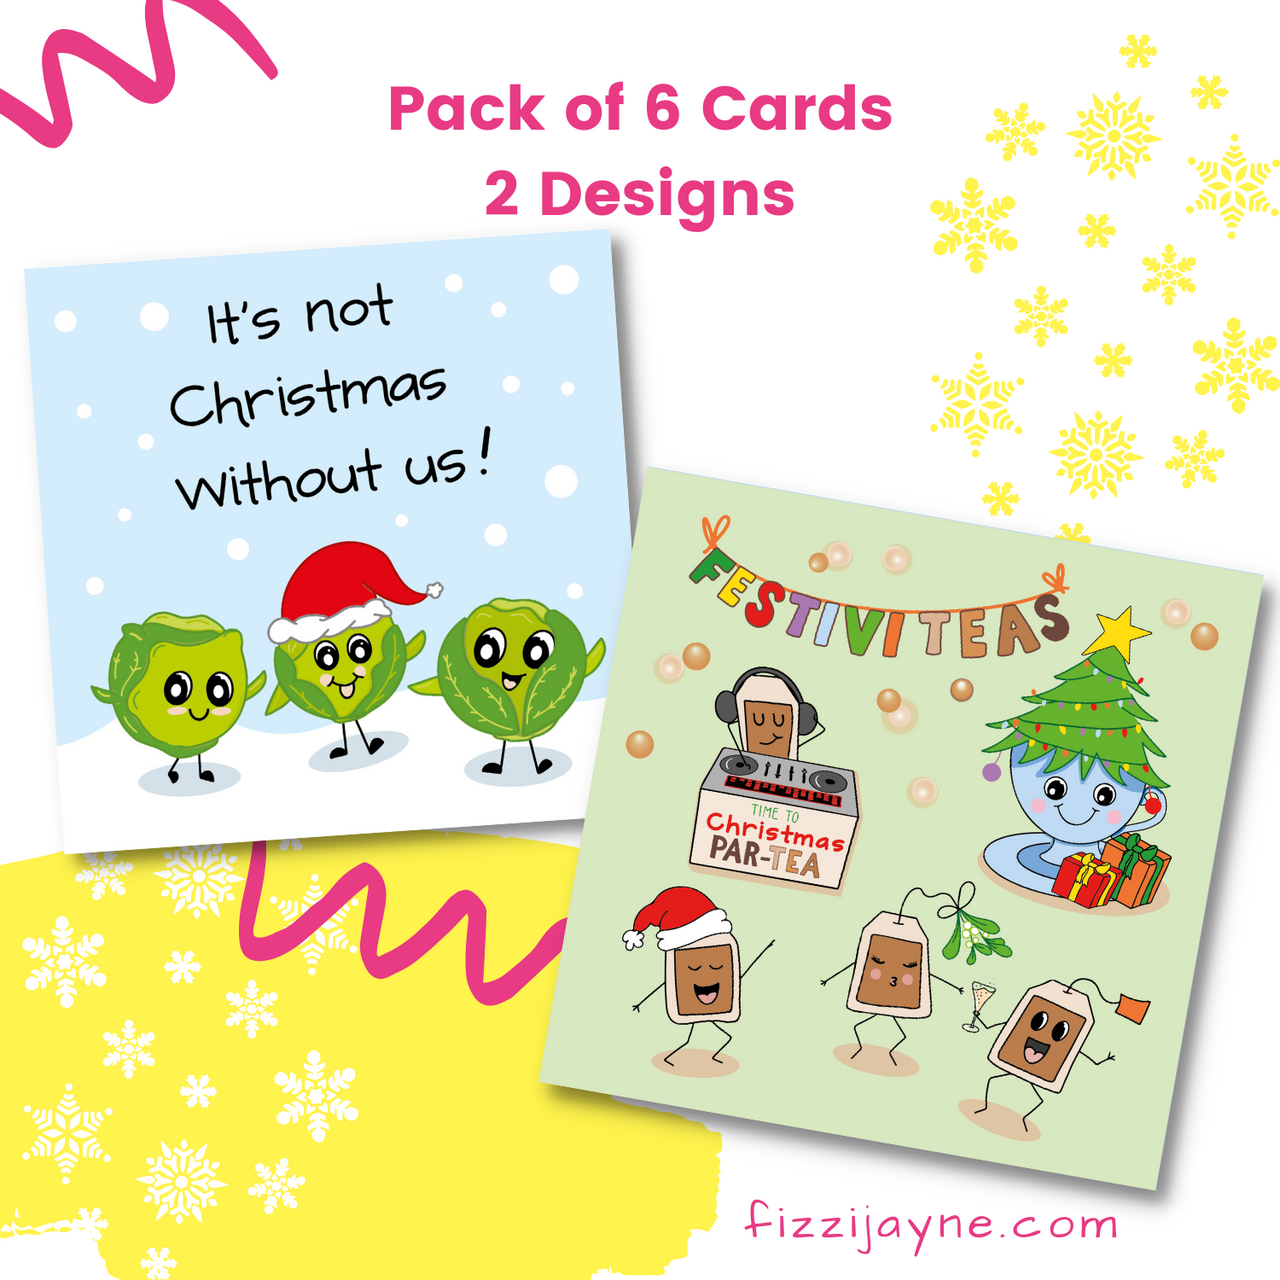 Festive Food Christmas Cards - Pack of 6